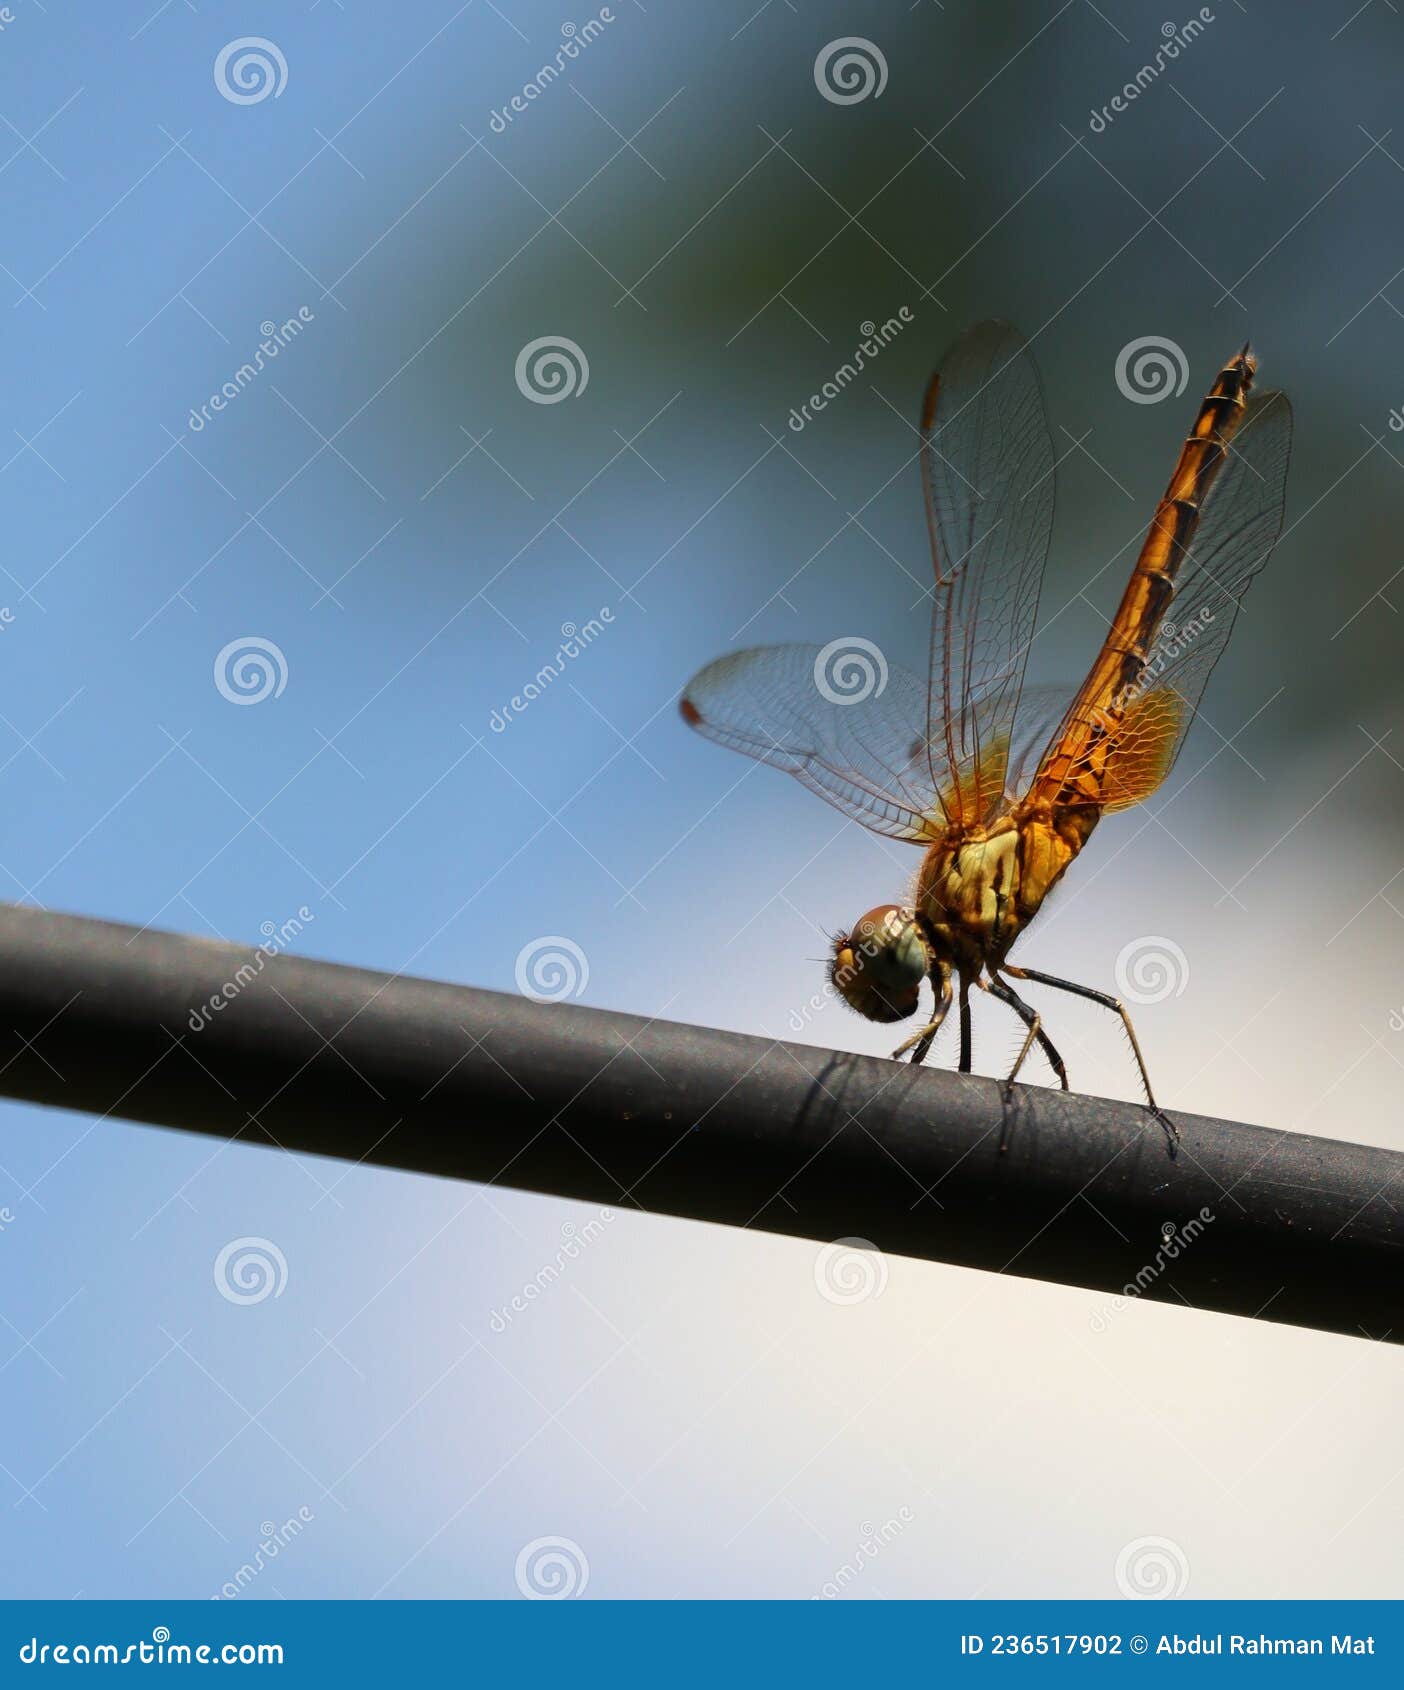 https://thumbs.dreamstime.com/z/beautiful-dragonfly-perch-placsic-pipe-closed-up-yellow-dragonfly-perch-plastic-pipe-236517902.jpg